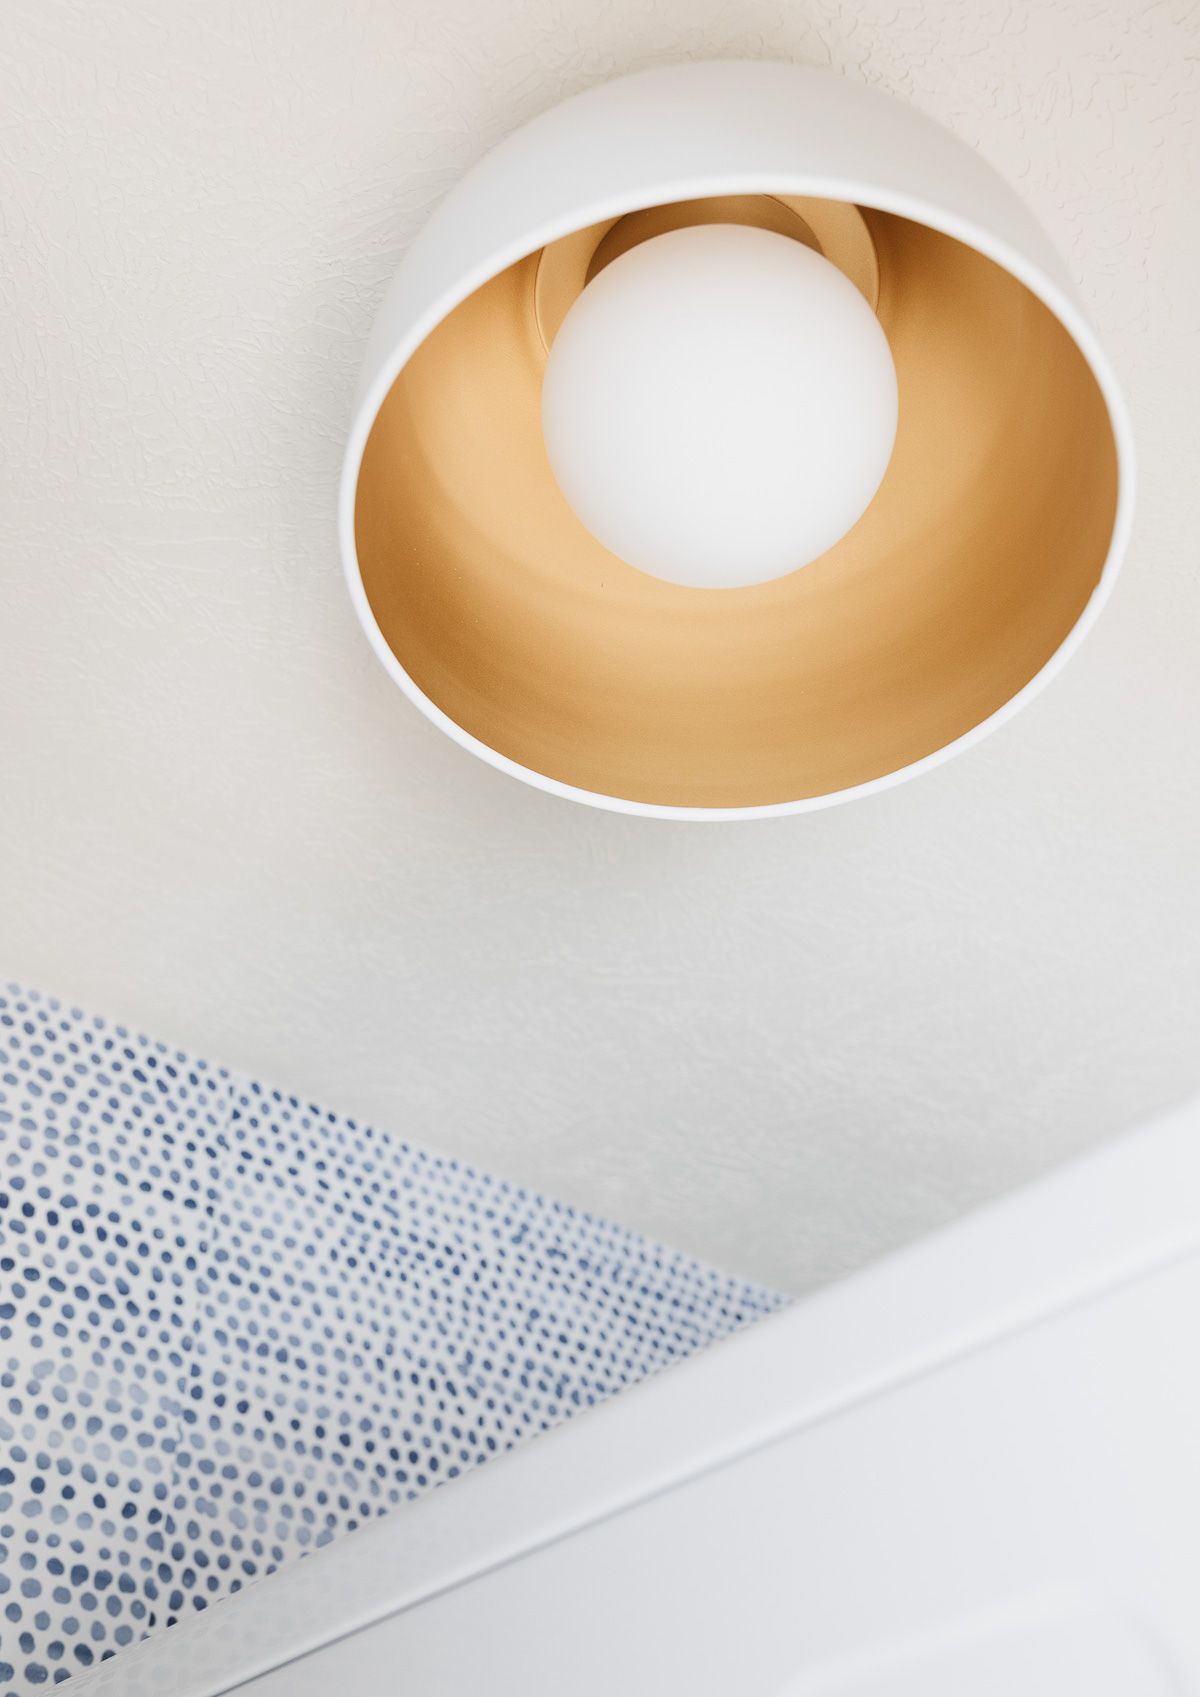 A gold and white light fixture on a ceiling next to blue and white wallpaper